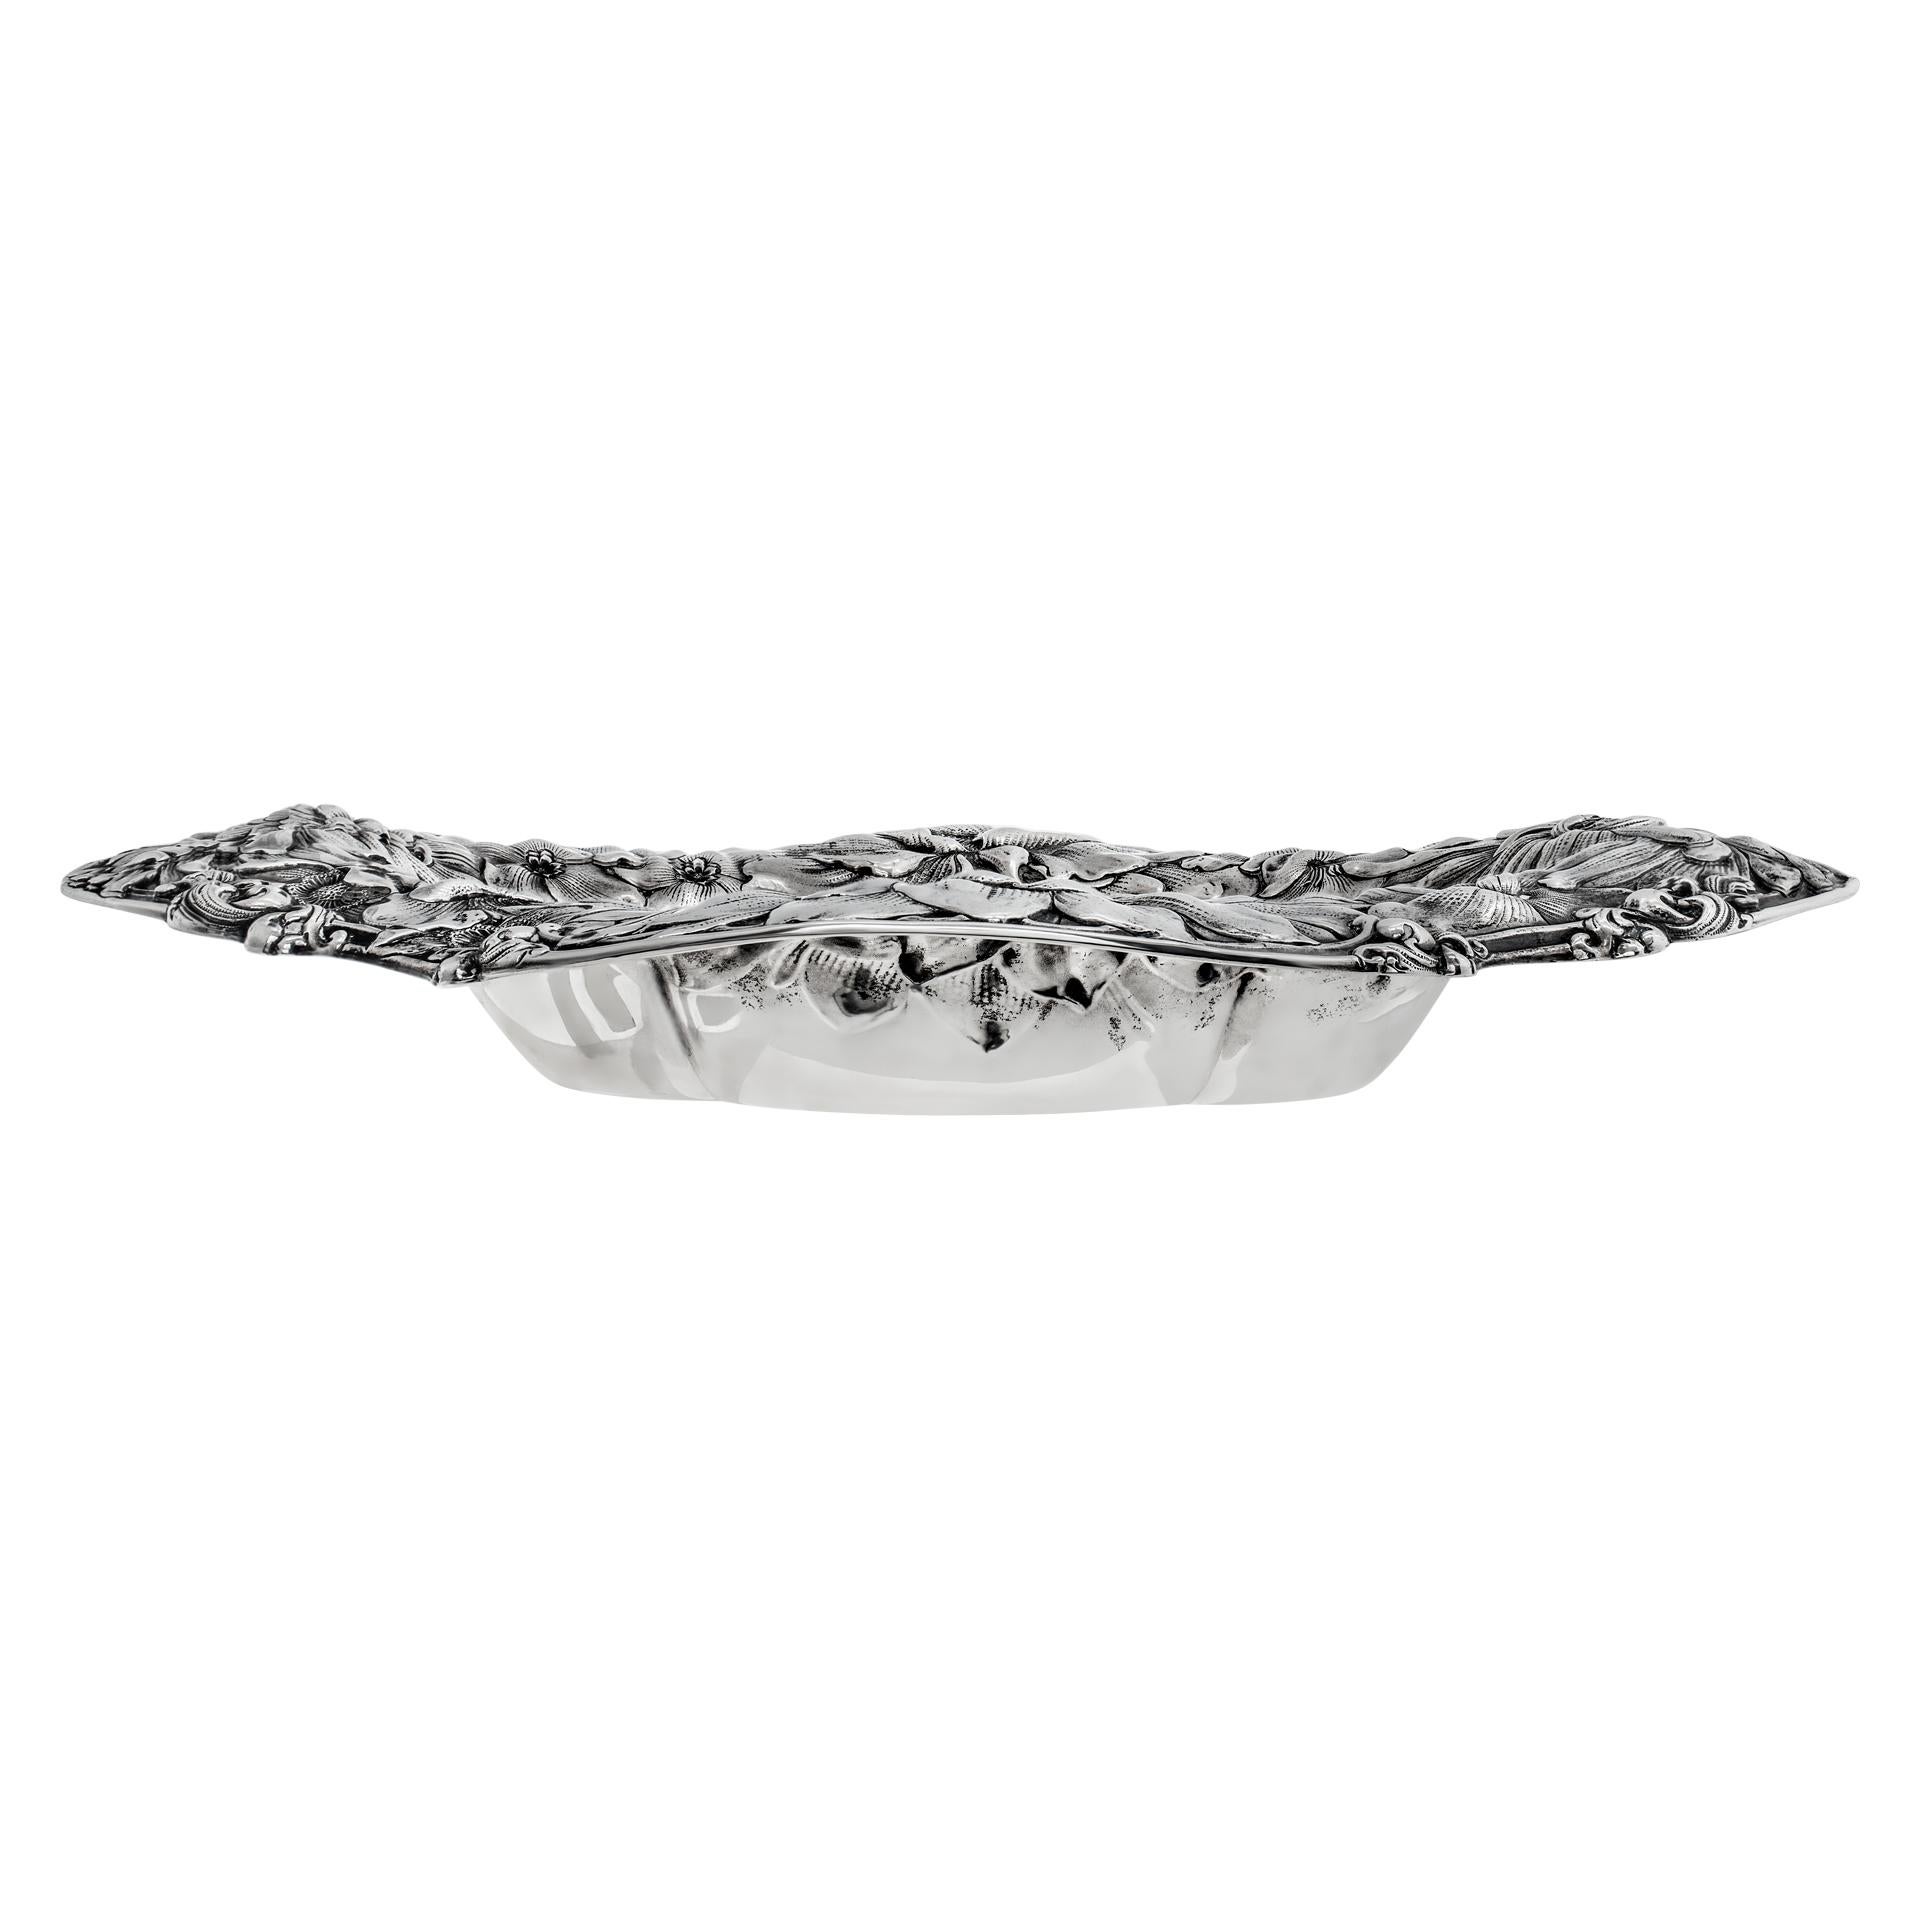 Imperial Chrysanthemum Sterling Silver Oval Bowl Centerpiece In Excellent Condition For Sale In Surfside, FL